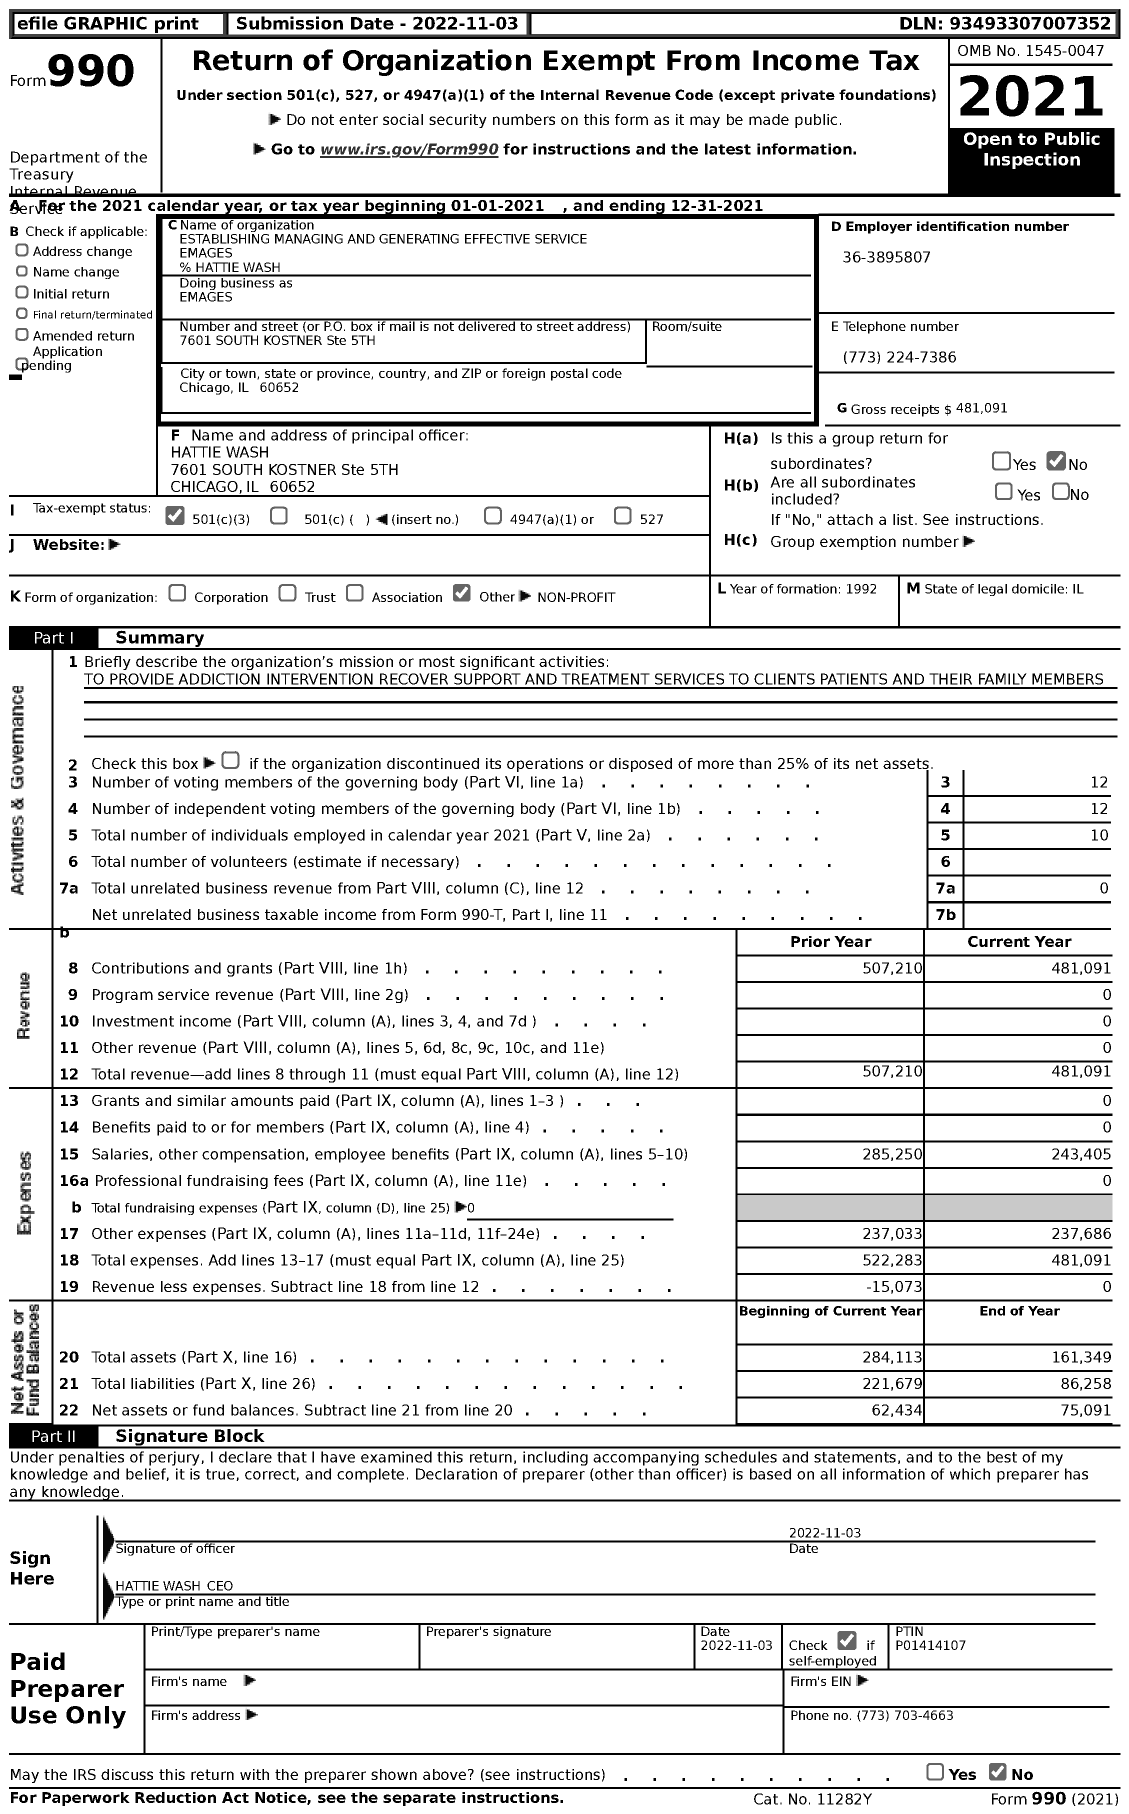 Image of first page of 2021 Form 990 for Establishing Managing and Generating Effective Service (EMAGES)